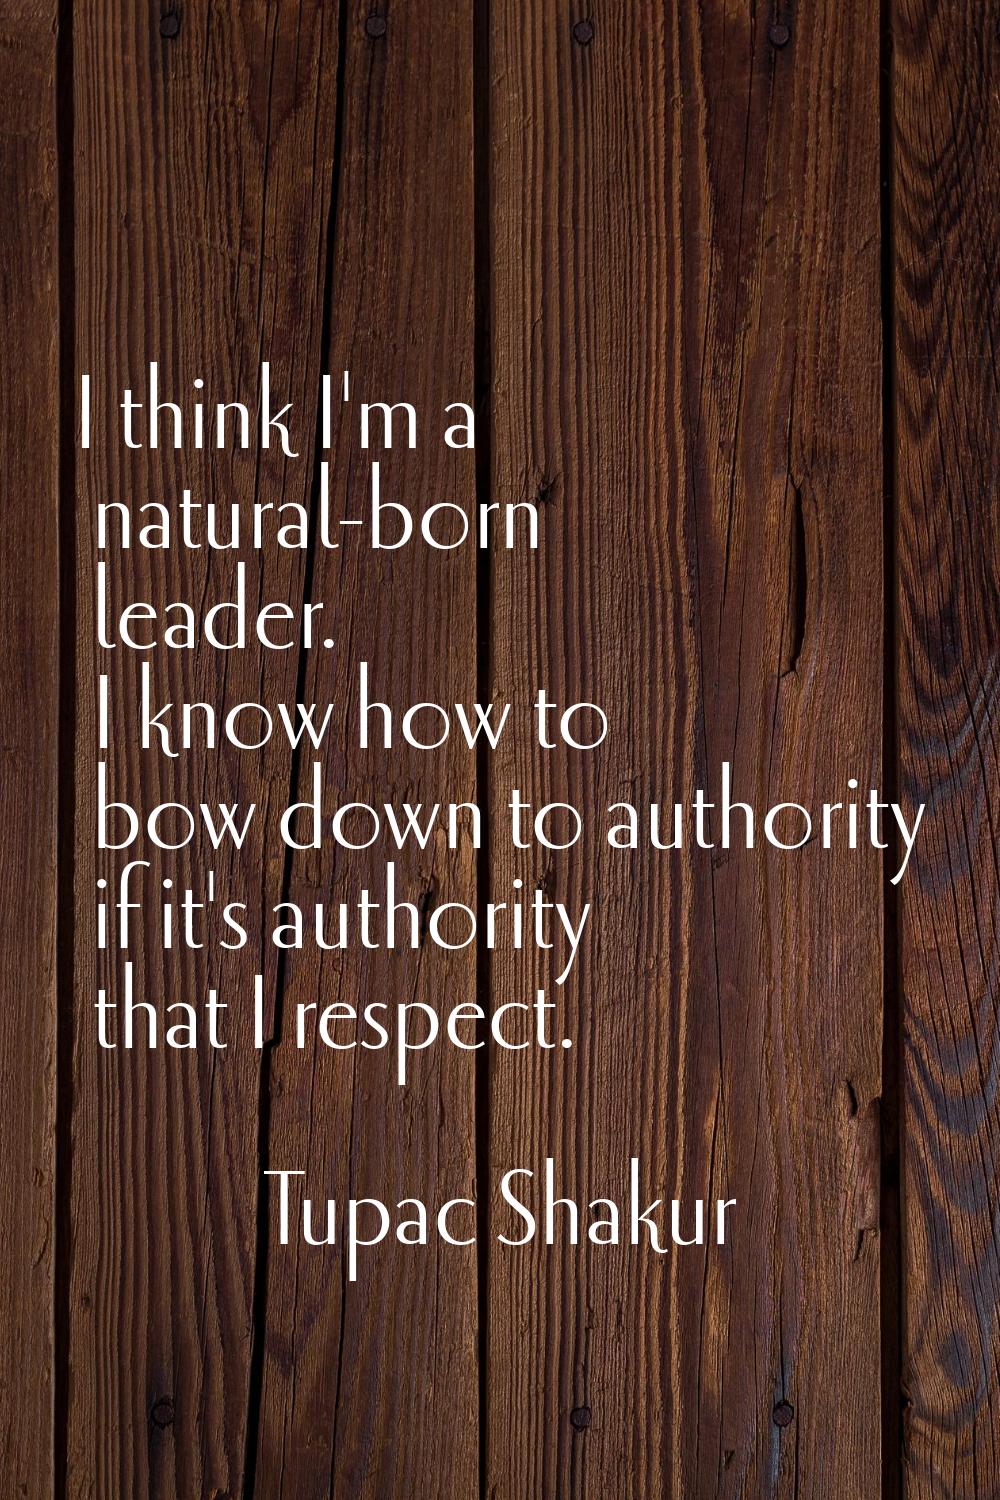 I think I'm a natural-born leader. I know how to bow down to authority if it's authority that I res